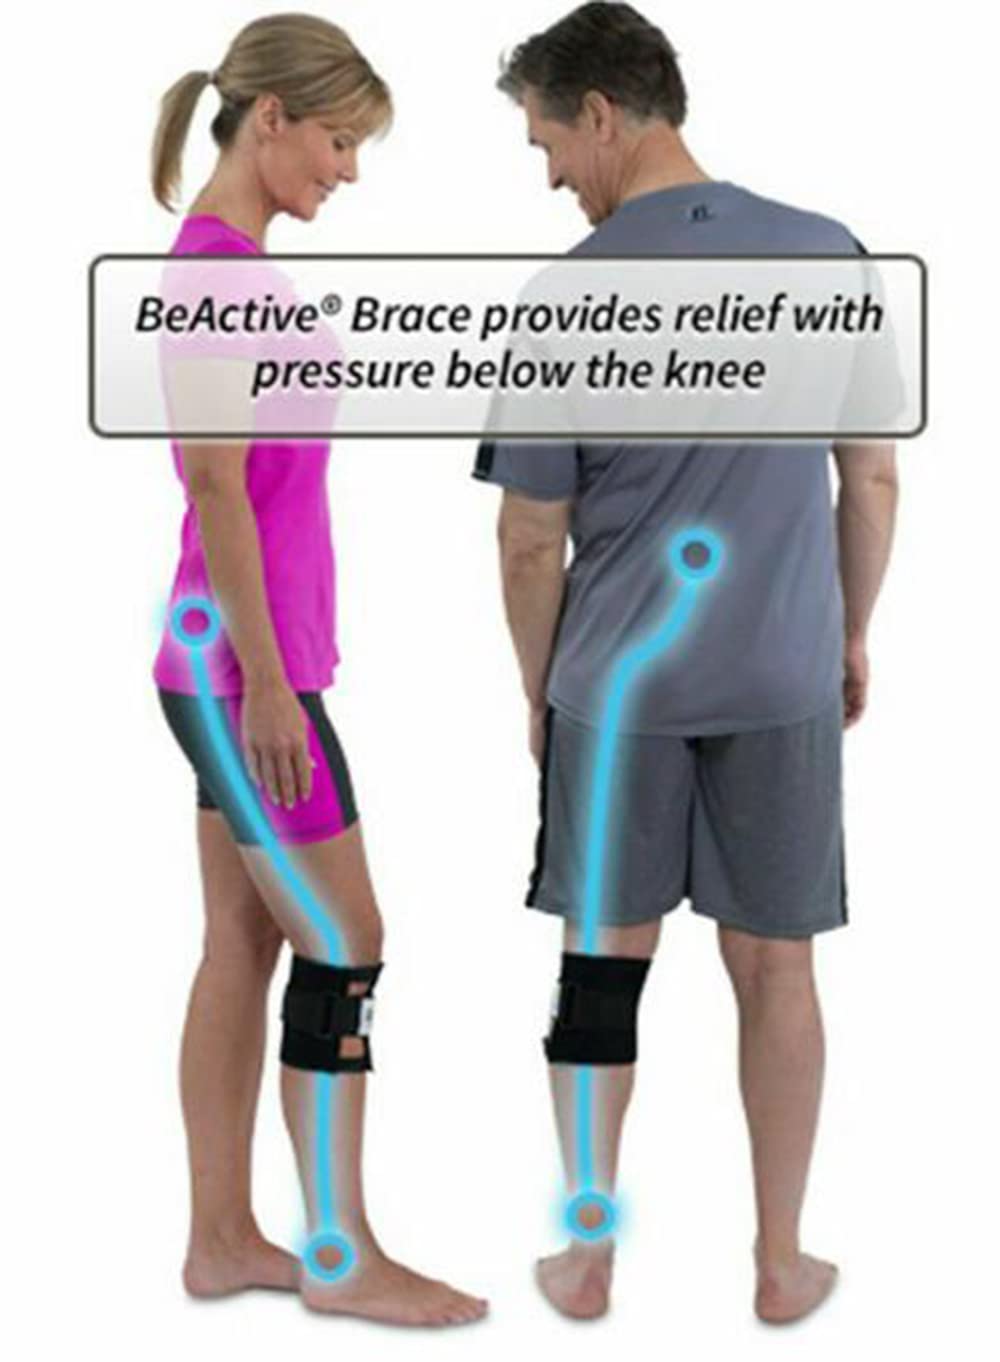 2pcs Sciatica Pain Relief Devices,Pressure Point Brace Relieve Acupressure Leg Sciatica, Magnetic Therapy Self Heating Knee Support Wraps Pain Relief, Sciatic Nerve Brace For Knee Pain, Fit For Men & Women